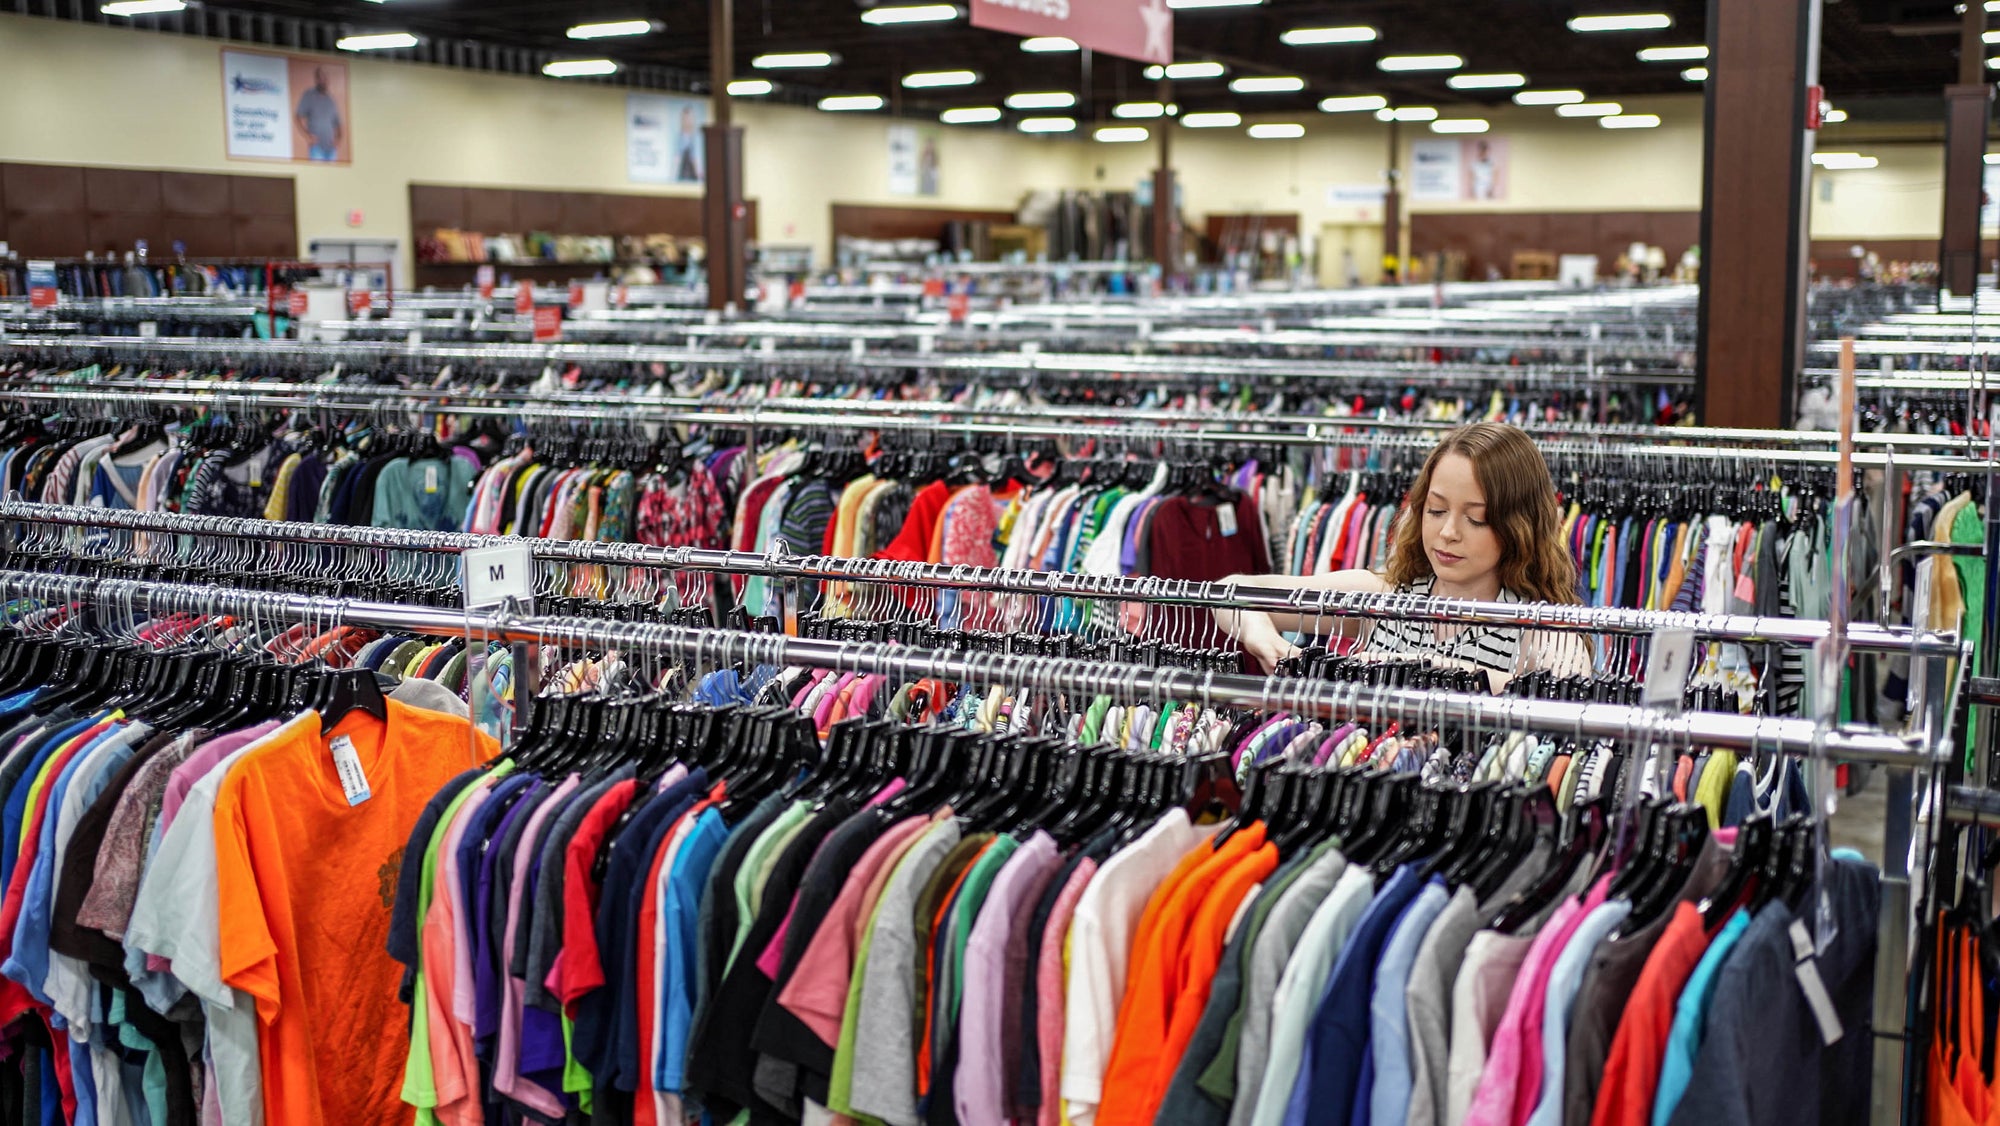 America's Thrift Supply is powered by America's Thrift Store. Since 1984 America's Thrift Stores have been providing variety in size and style at discount prices. America's Thrift Supply offers the same variety and competitive pricing for in bulk sales.